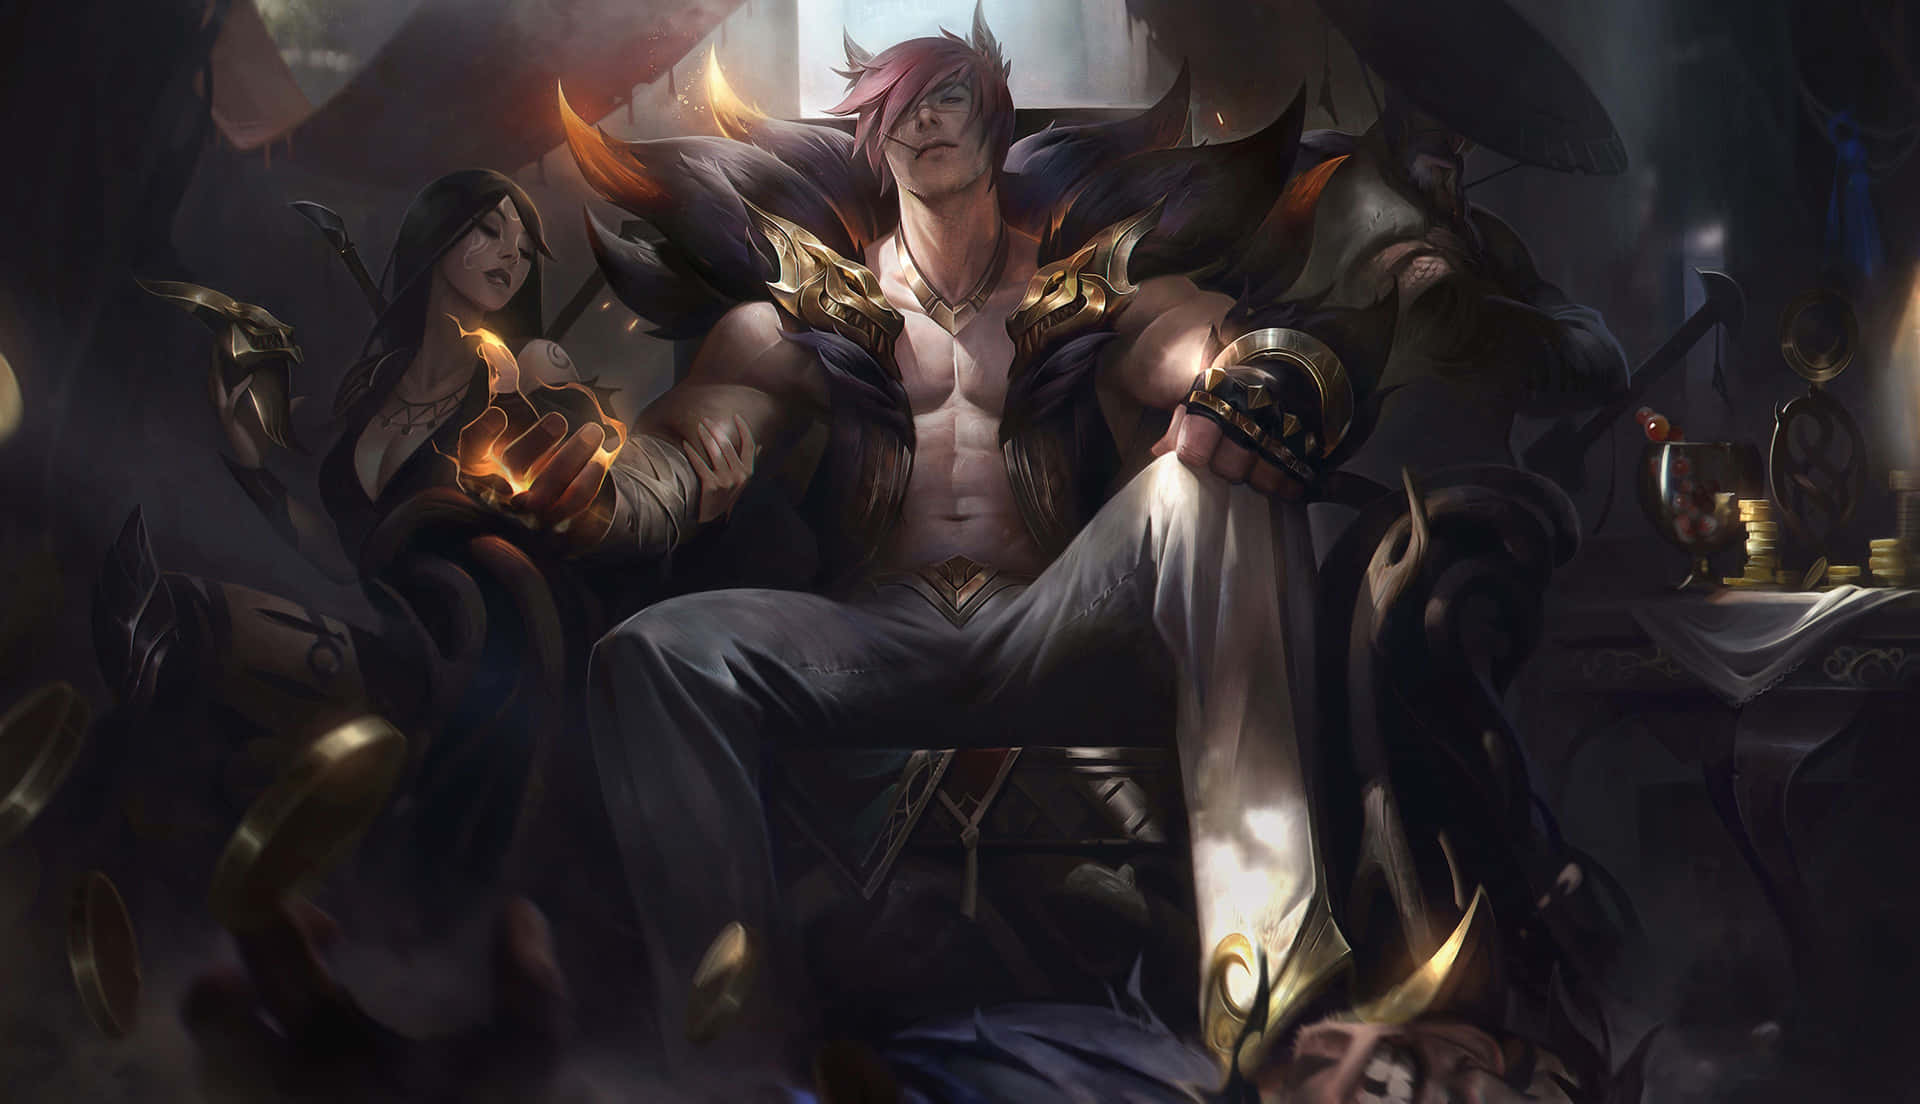 Master the art of playing League of Legends